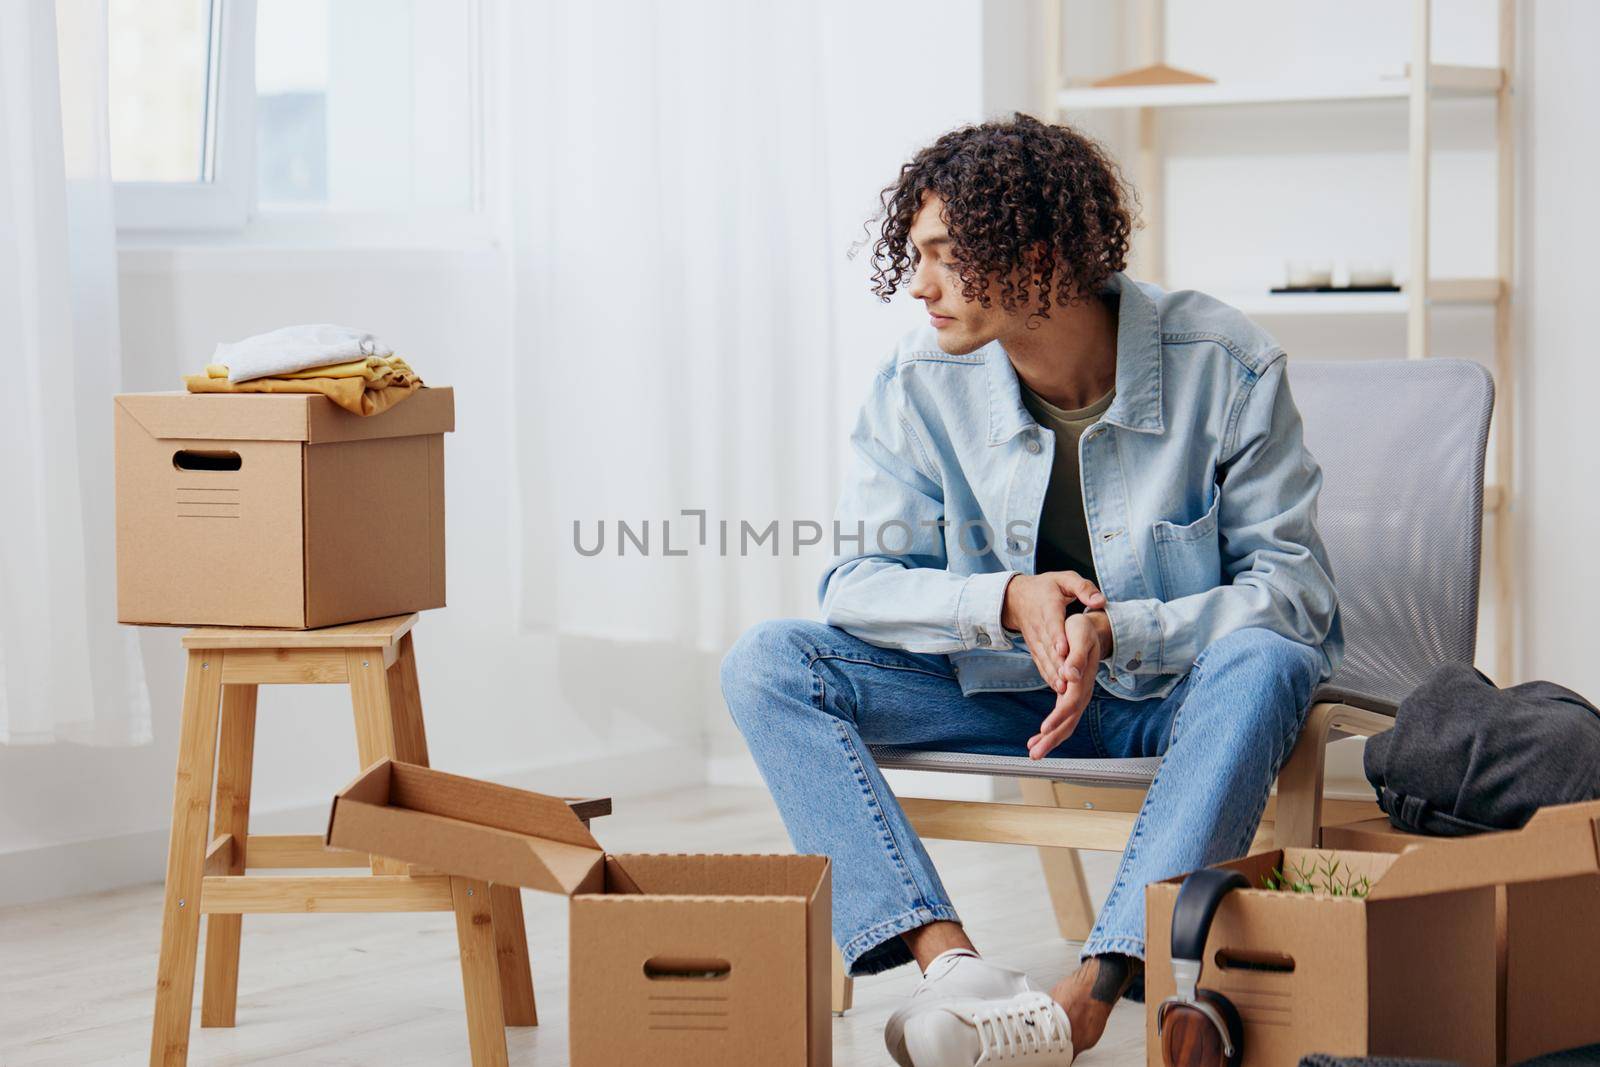 handsome guy cardboard boxes in the room unpacking interior by SHOTPRIME